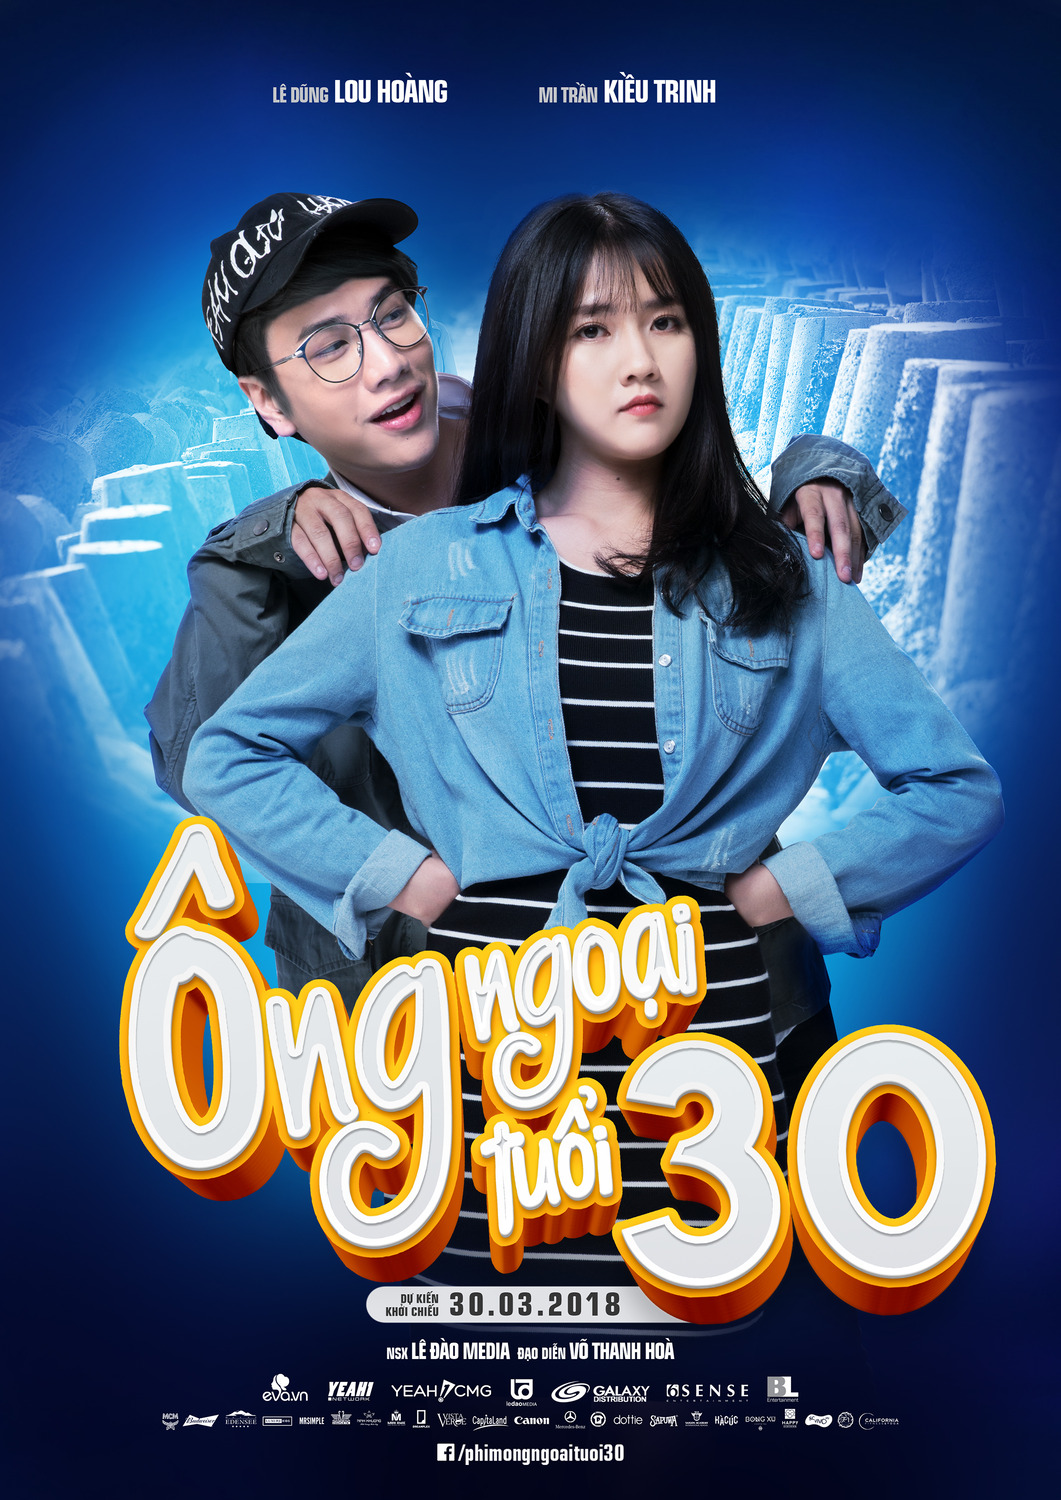 Extra Large Movie Poster Image for Ong Ngoai Tuoi 30 (#6 of 8)